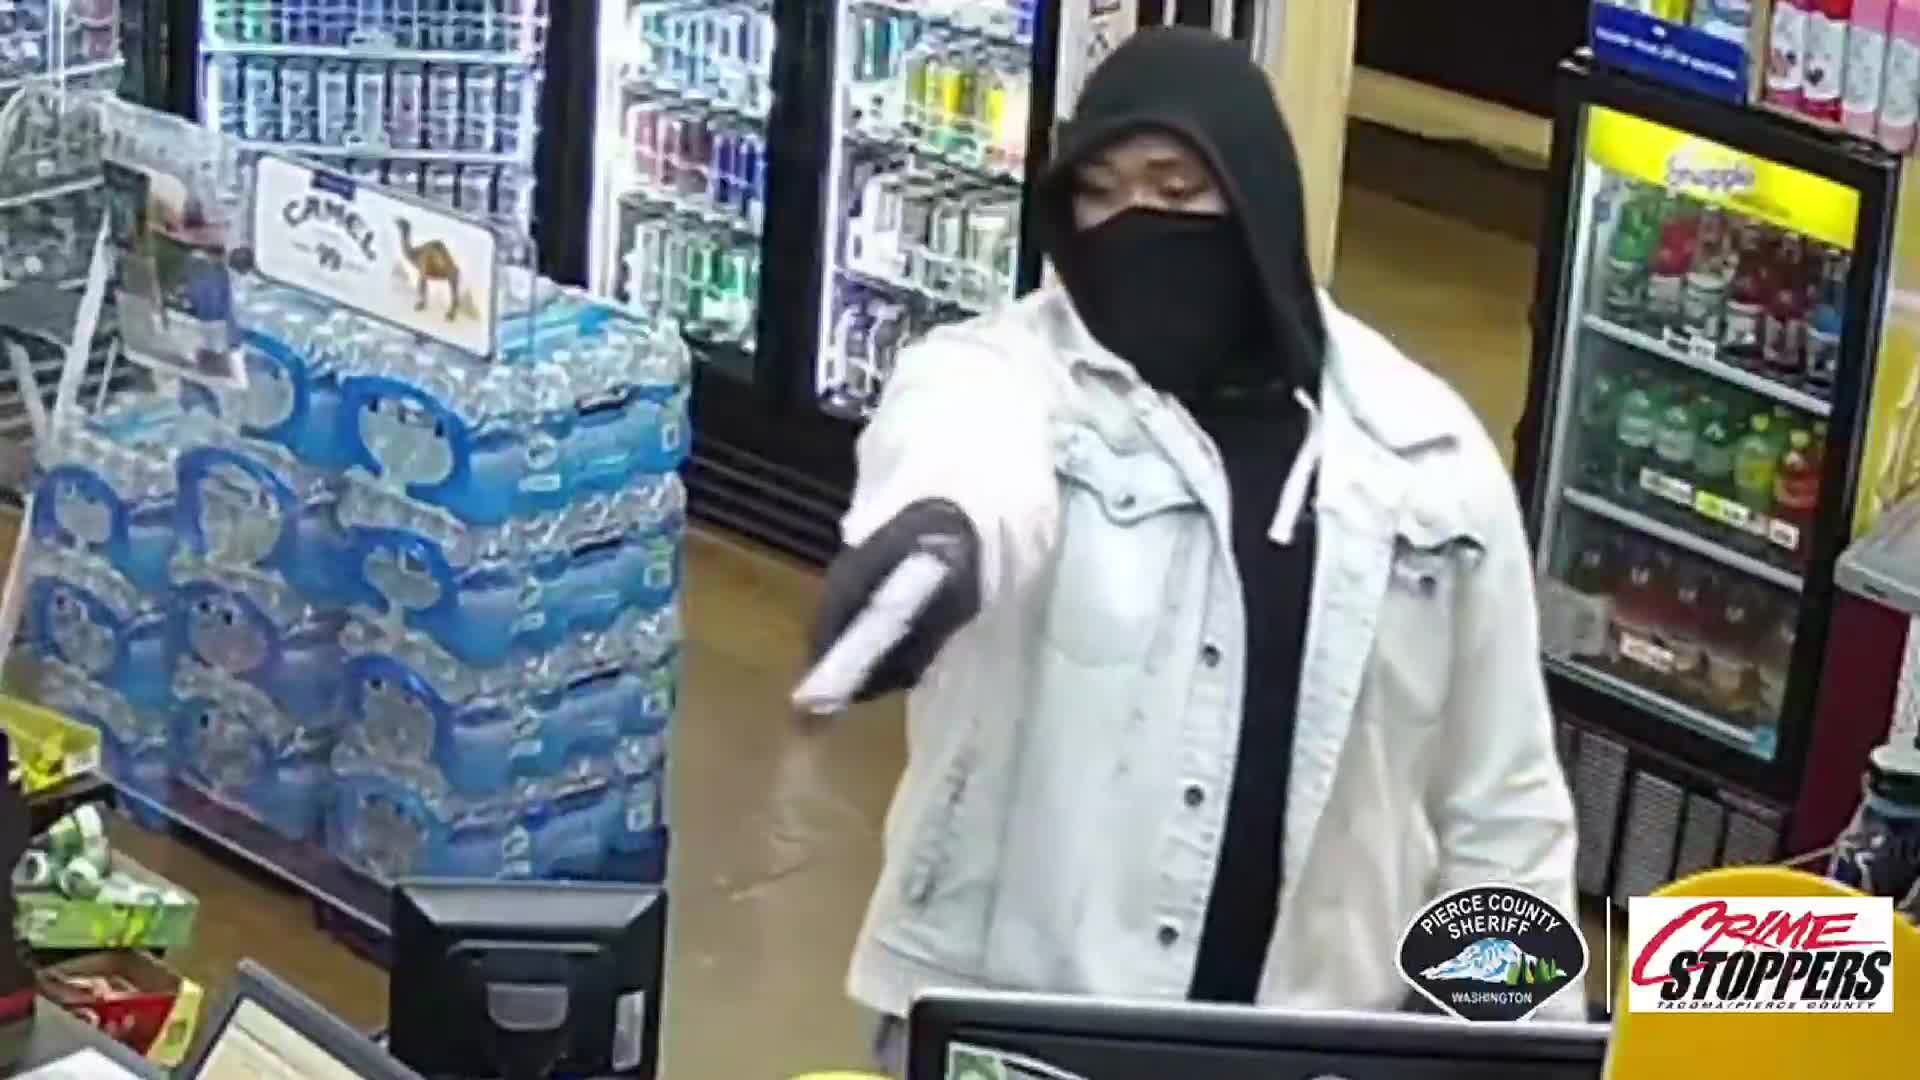 Pierce County seeks armed robbery suspect in Puyallup – KIRO 7 News Seattle